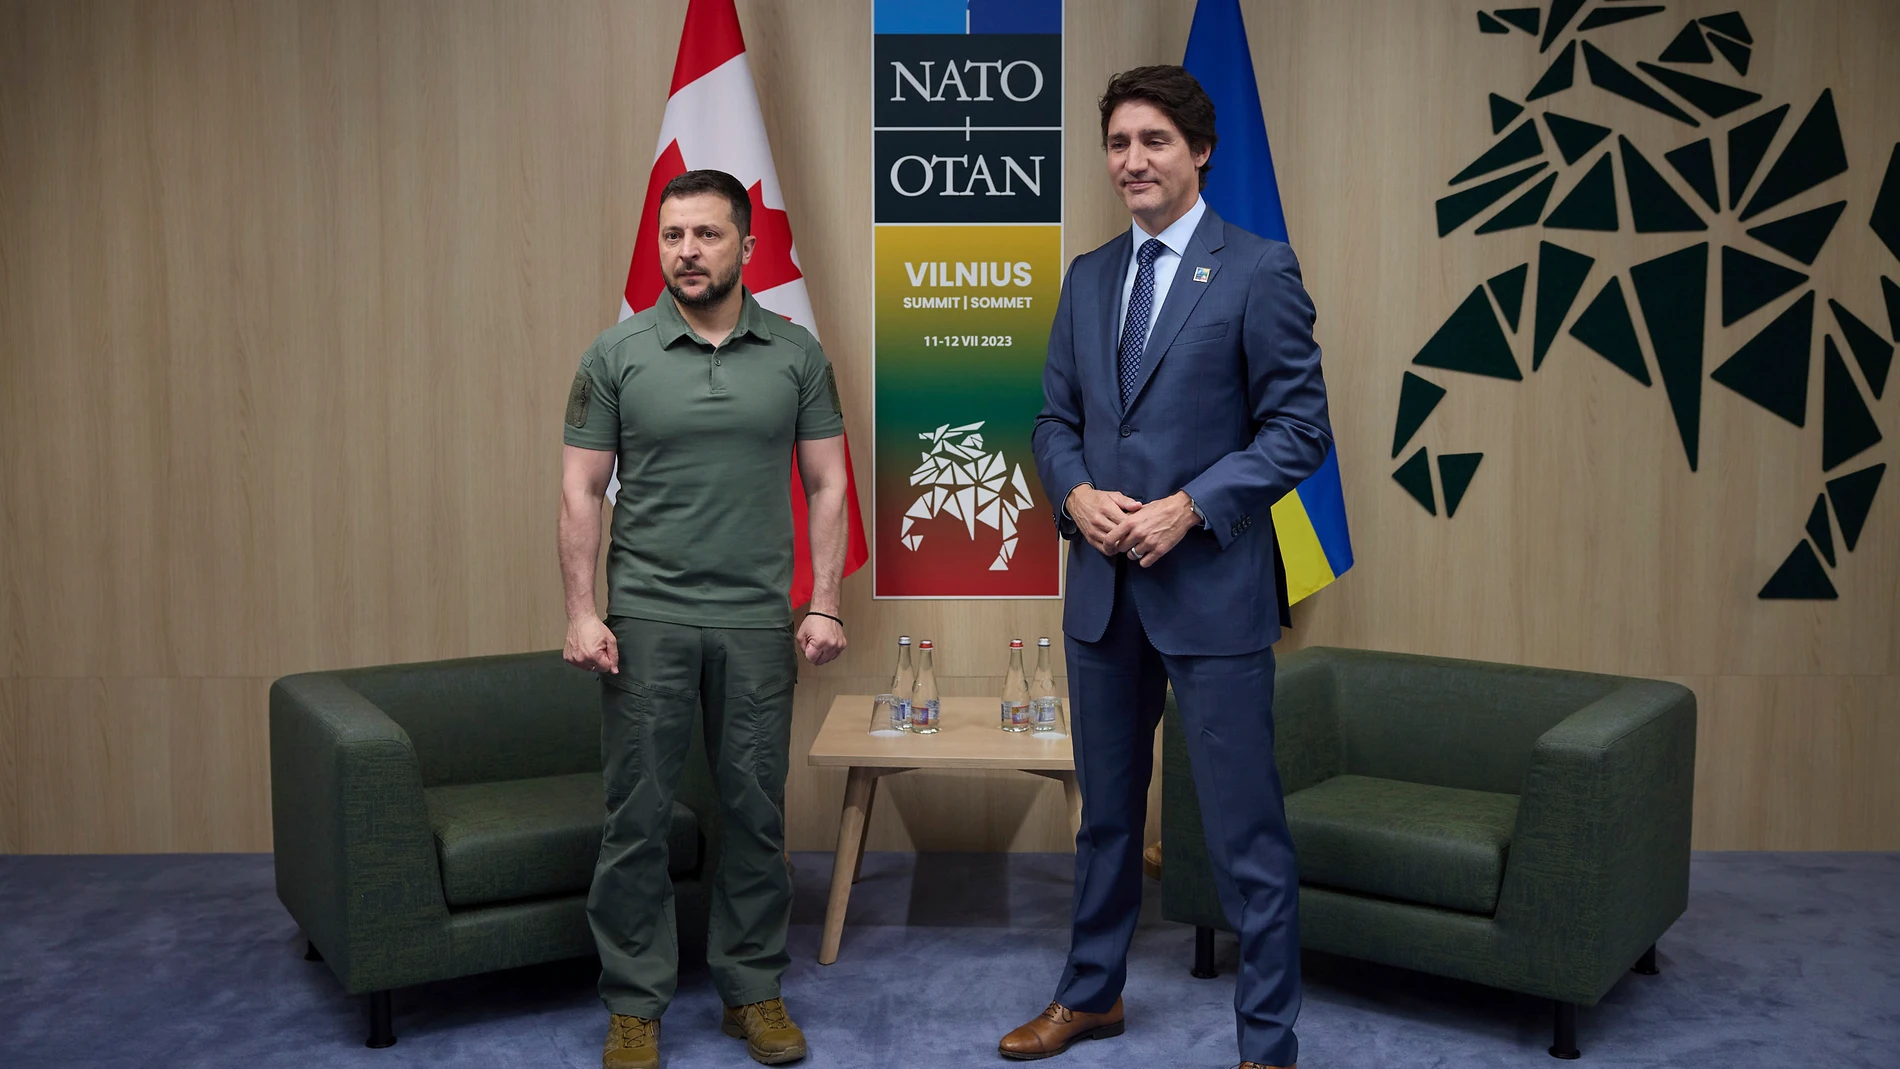 July 12, 2023, Vilnius, Lithuania: Ukrainian President Volodymyr Zelenskyy, left, stands with Canadian Prime Minister Justin Trudeau, right, during a bilateral meeting on the sidelines of the NATO Summit at the Lithuanian Exhibition and Congress Center, July 12, 2023 in Vilnius, Lithuania. (Foto de ARCHIVO) 12/07/2023